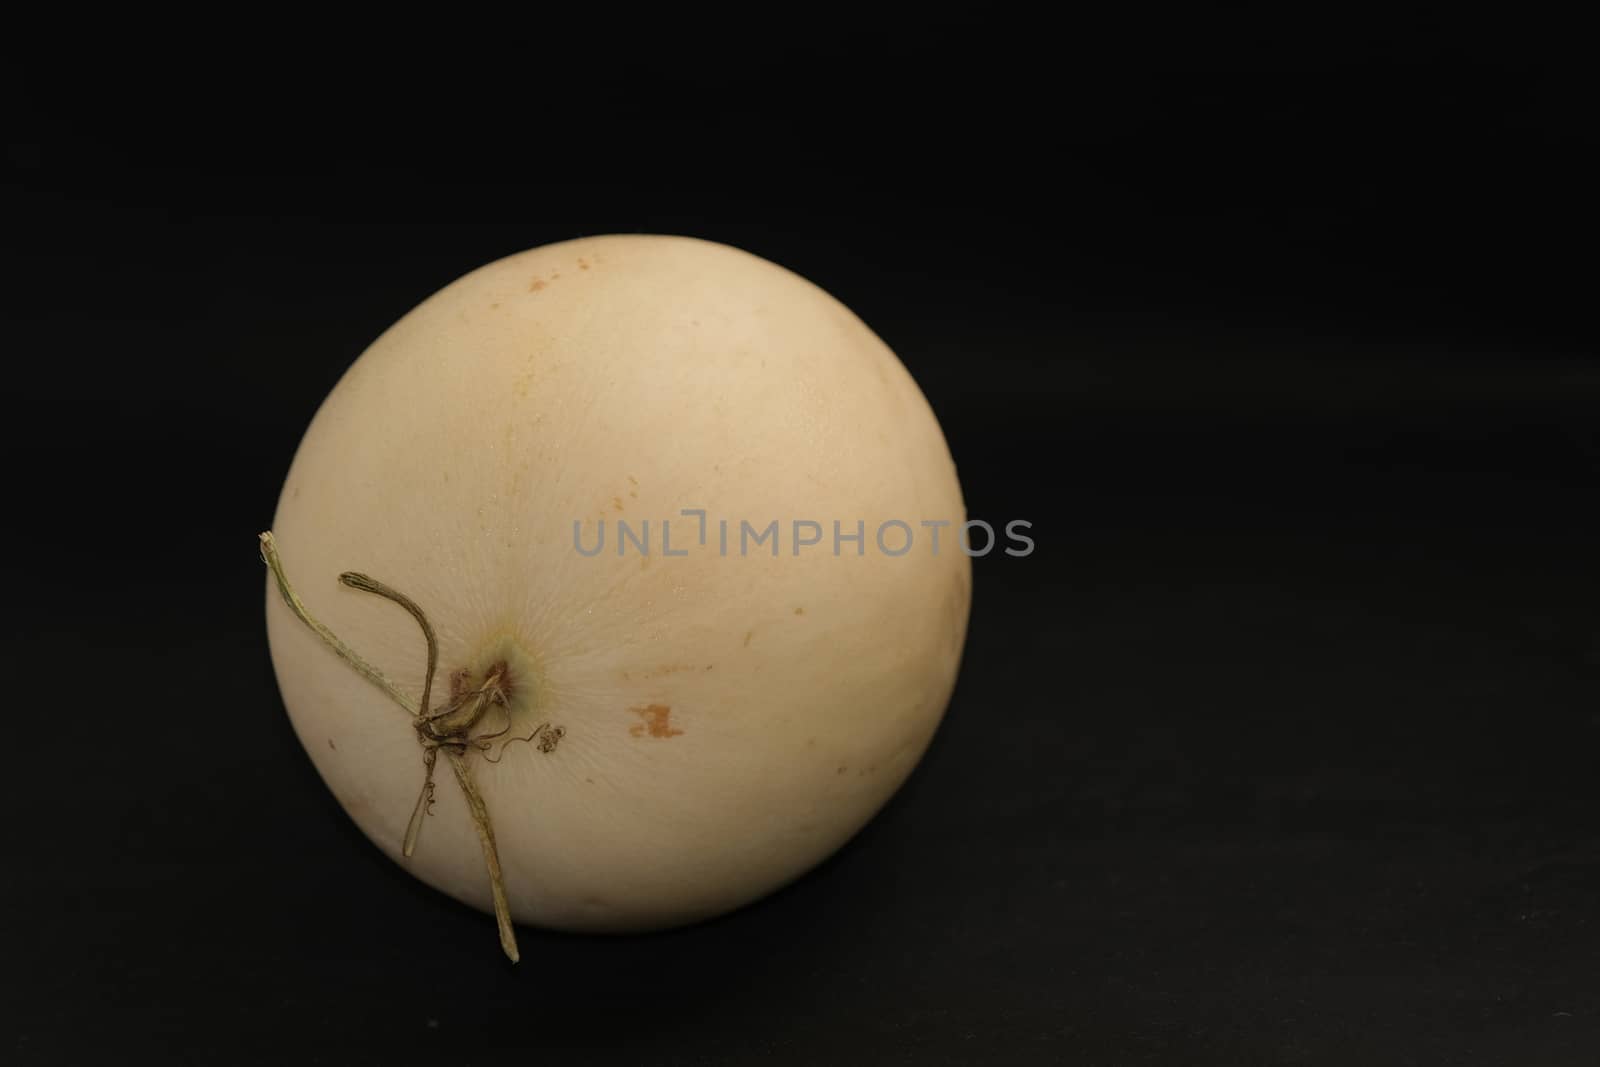 A Cantaloupe Melon on the black background with space for put the text